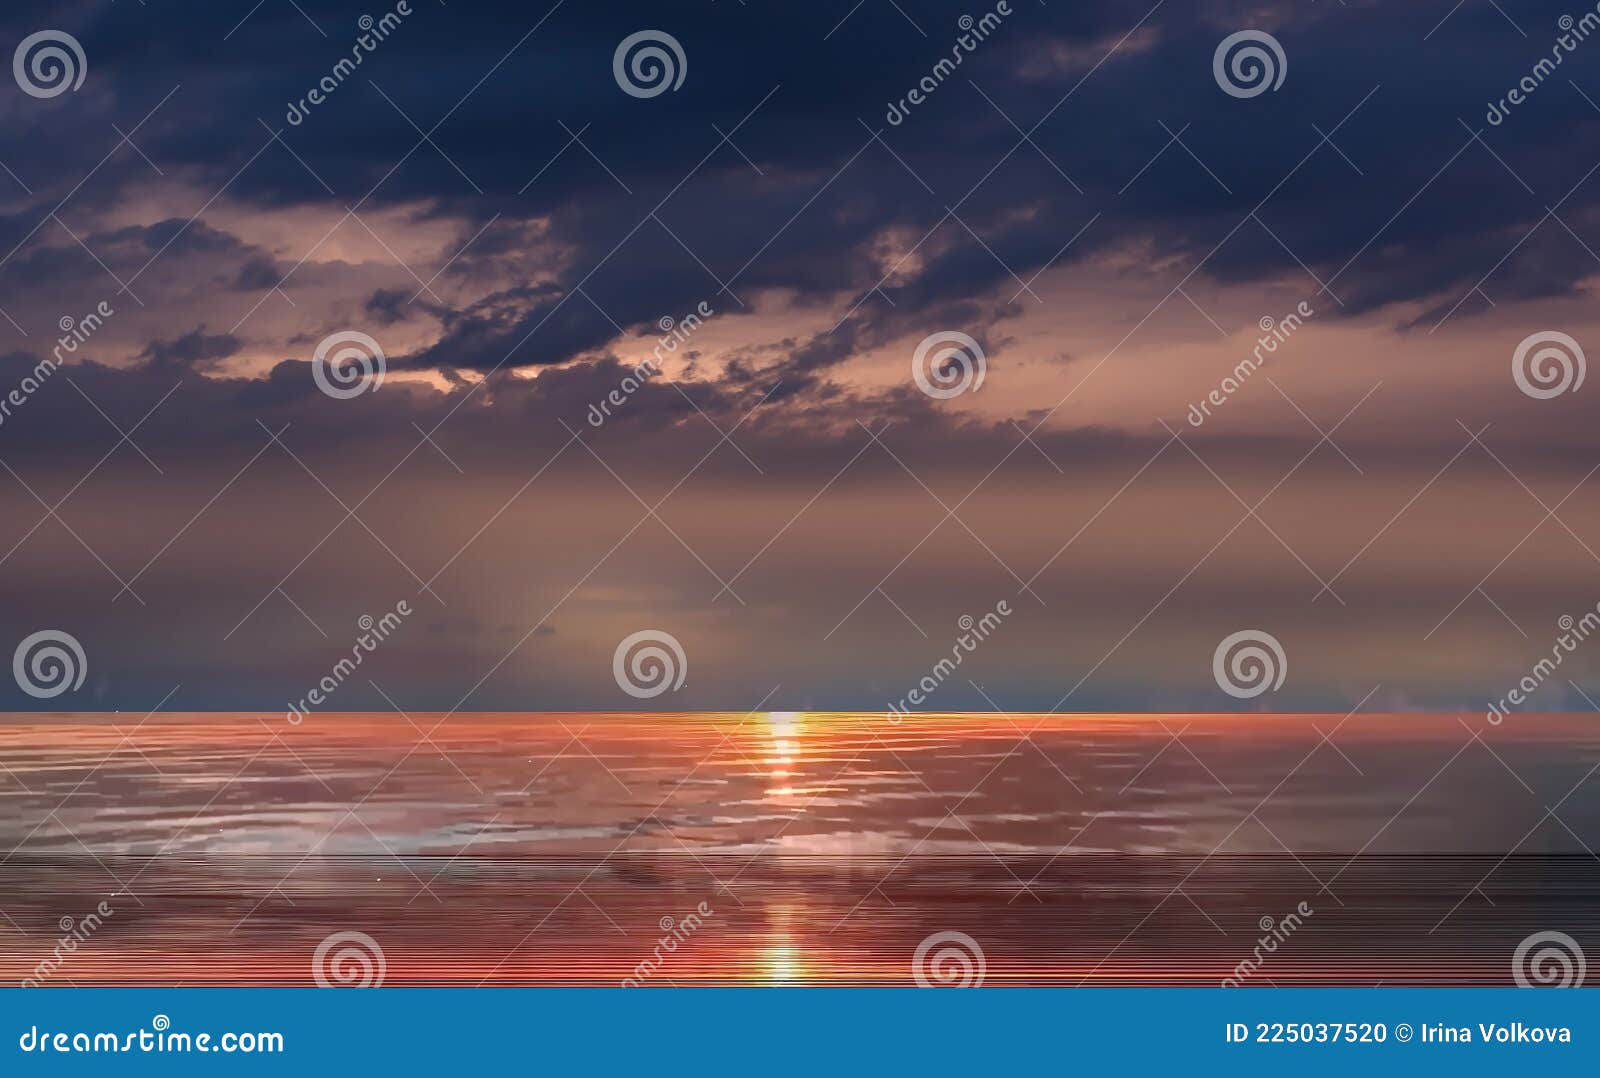 dramatic clouds sunset  at sea  on blue starry sky at gold yellow sunset natire seascape